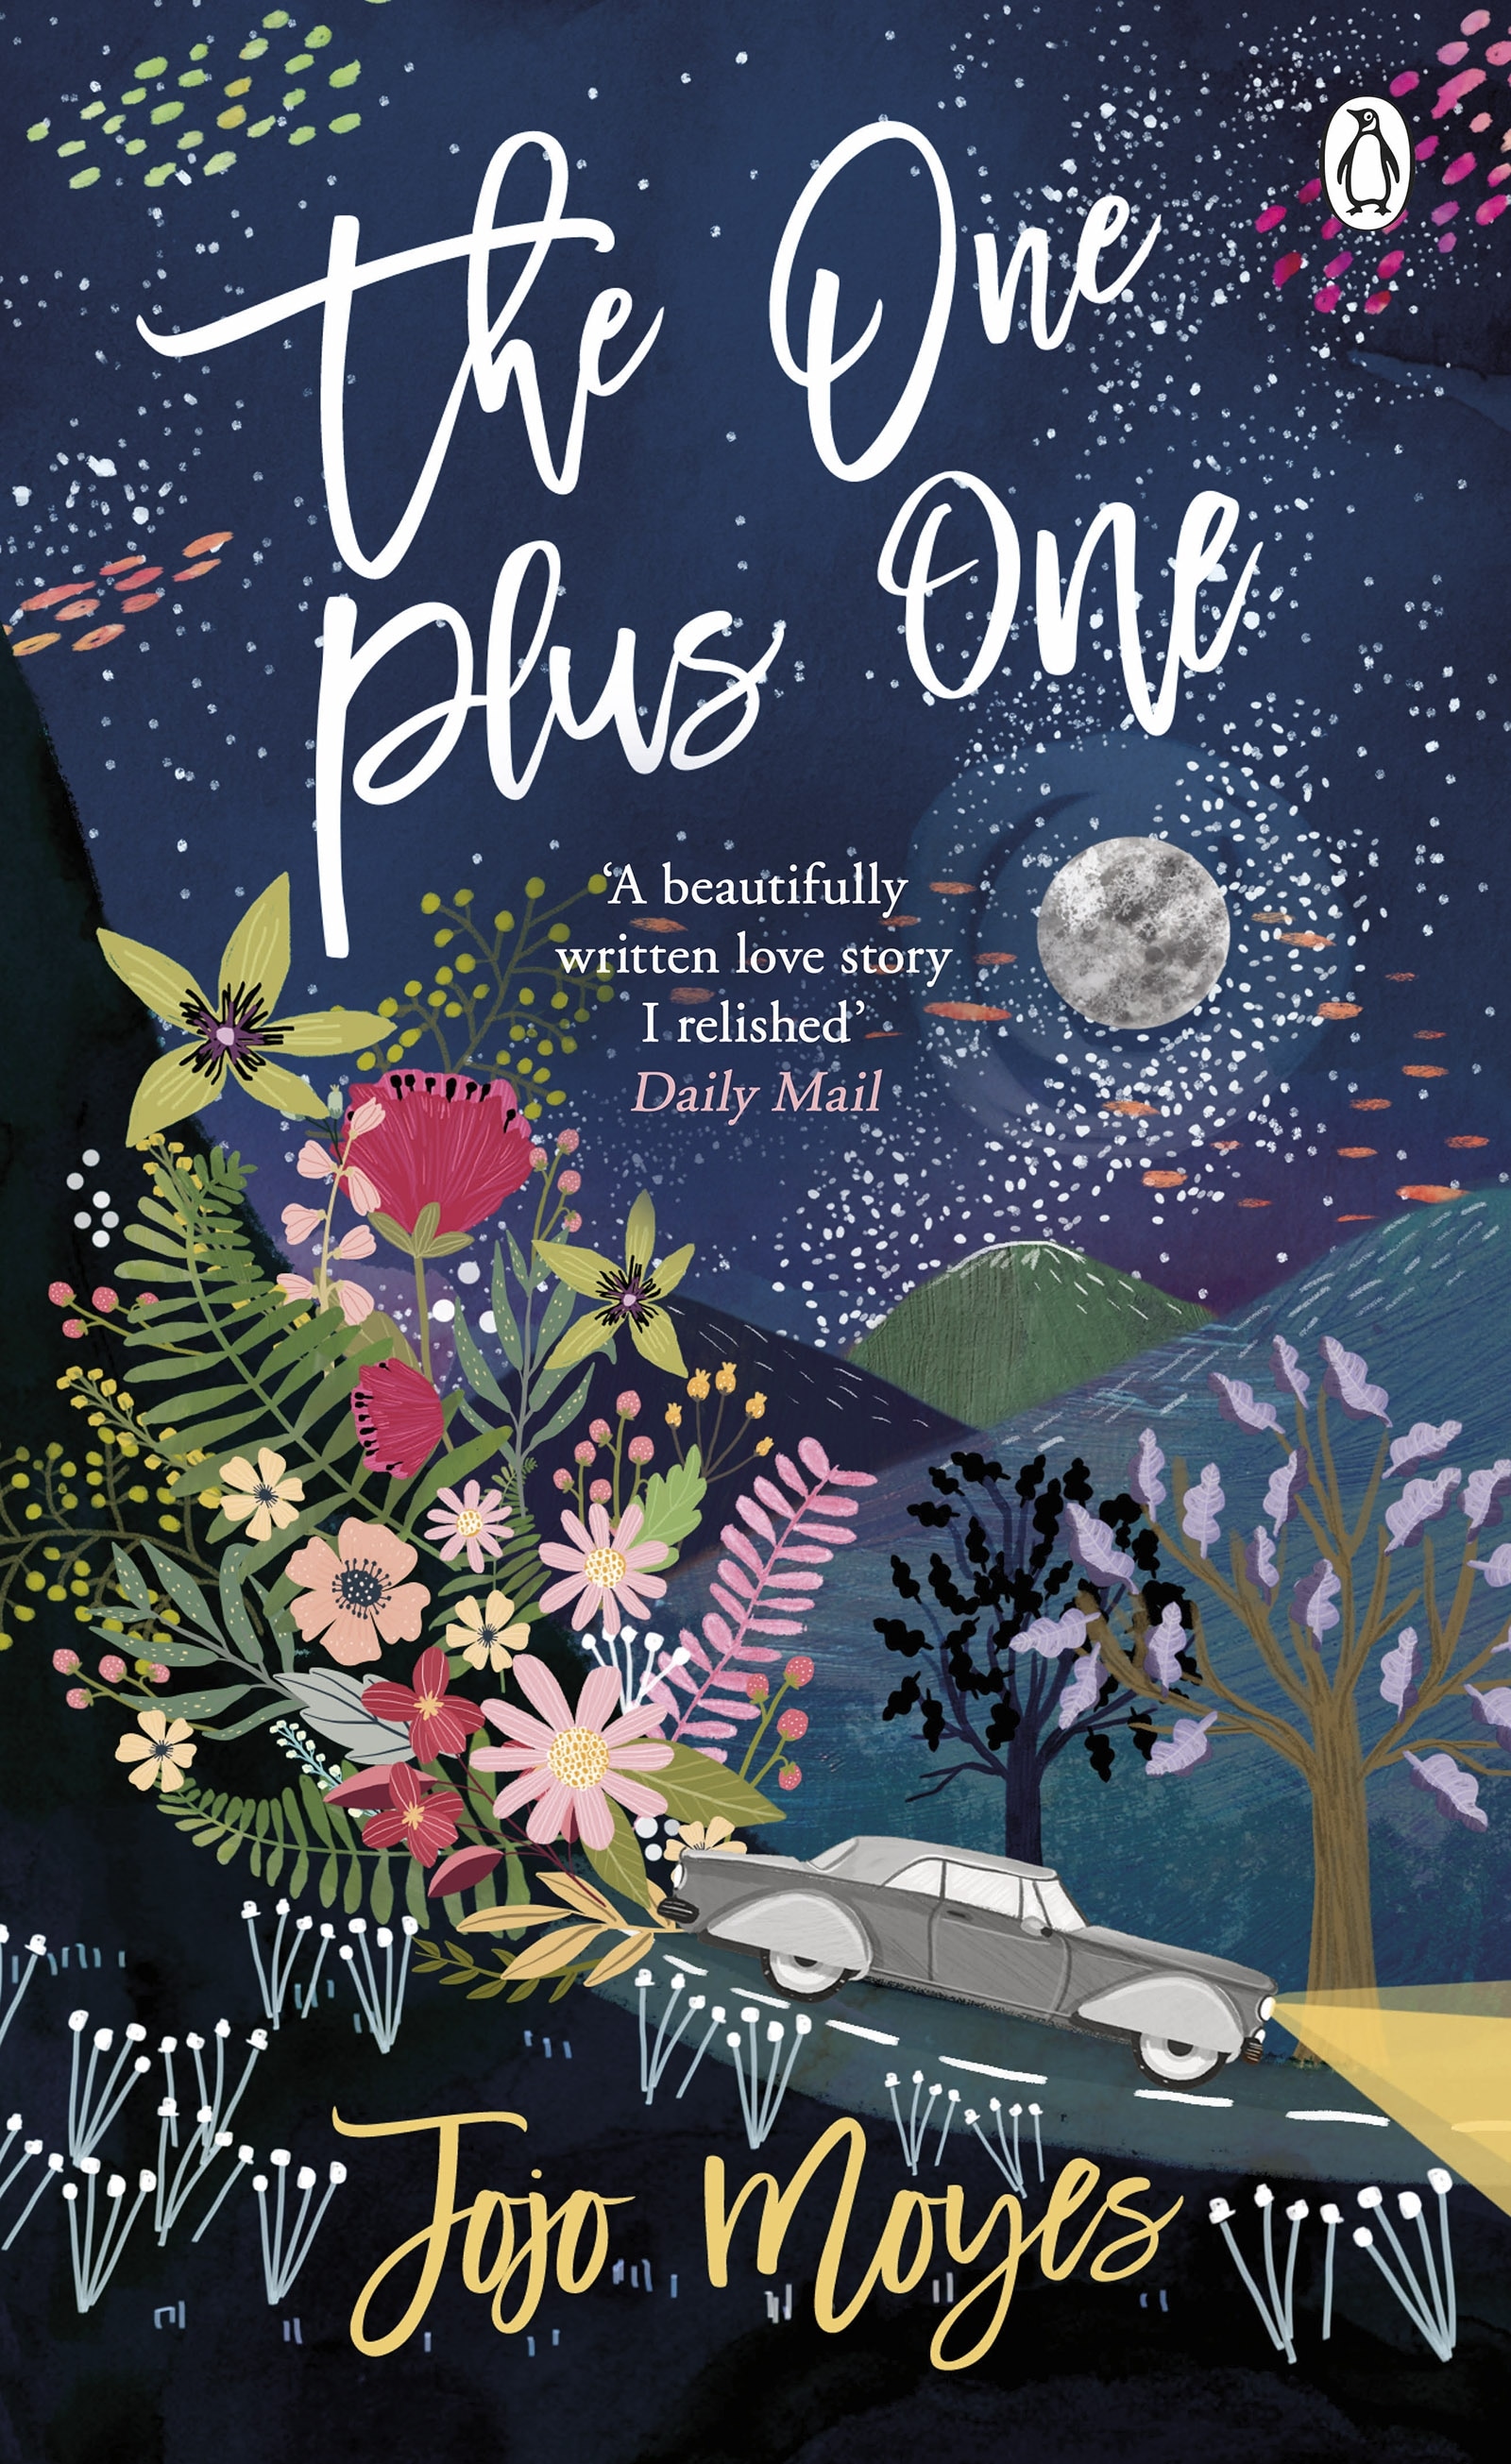 Book “The One Plus One” by Jojo Moyes — July 25, 2019